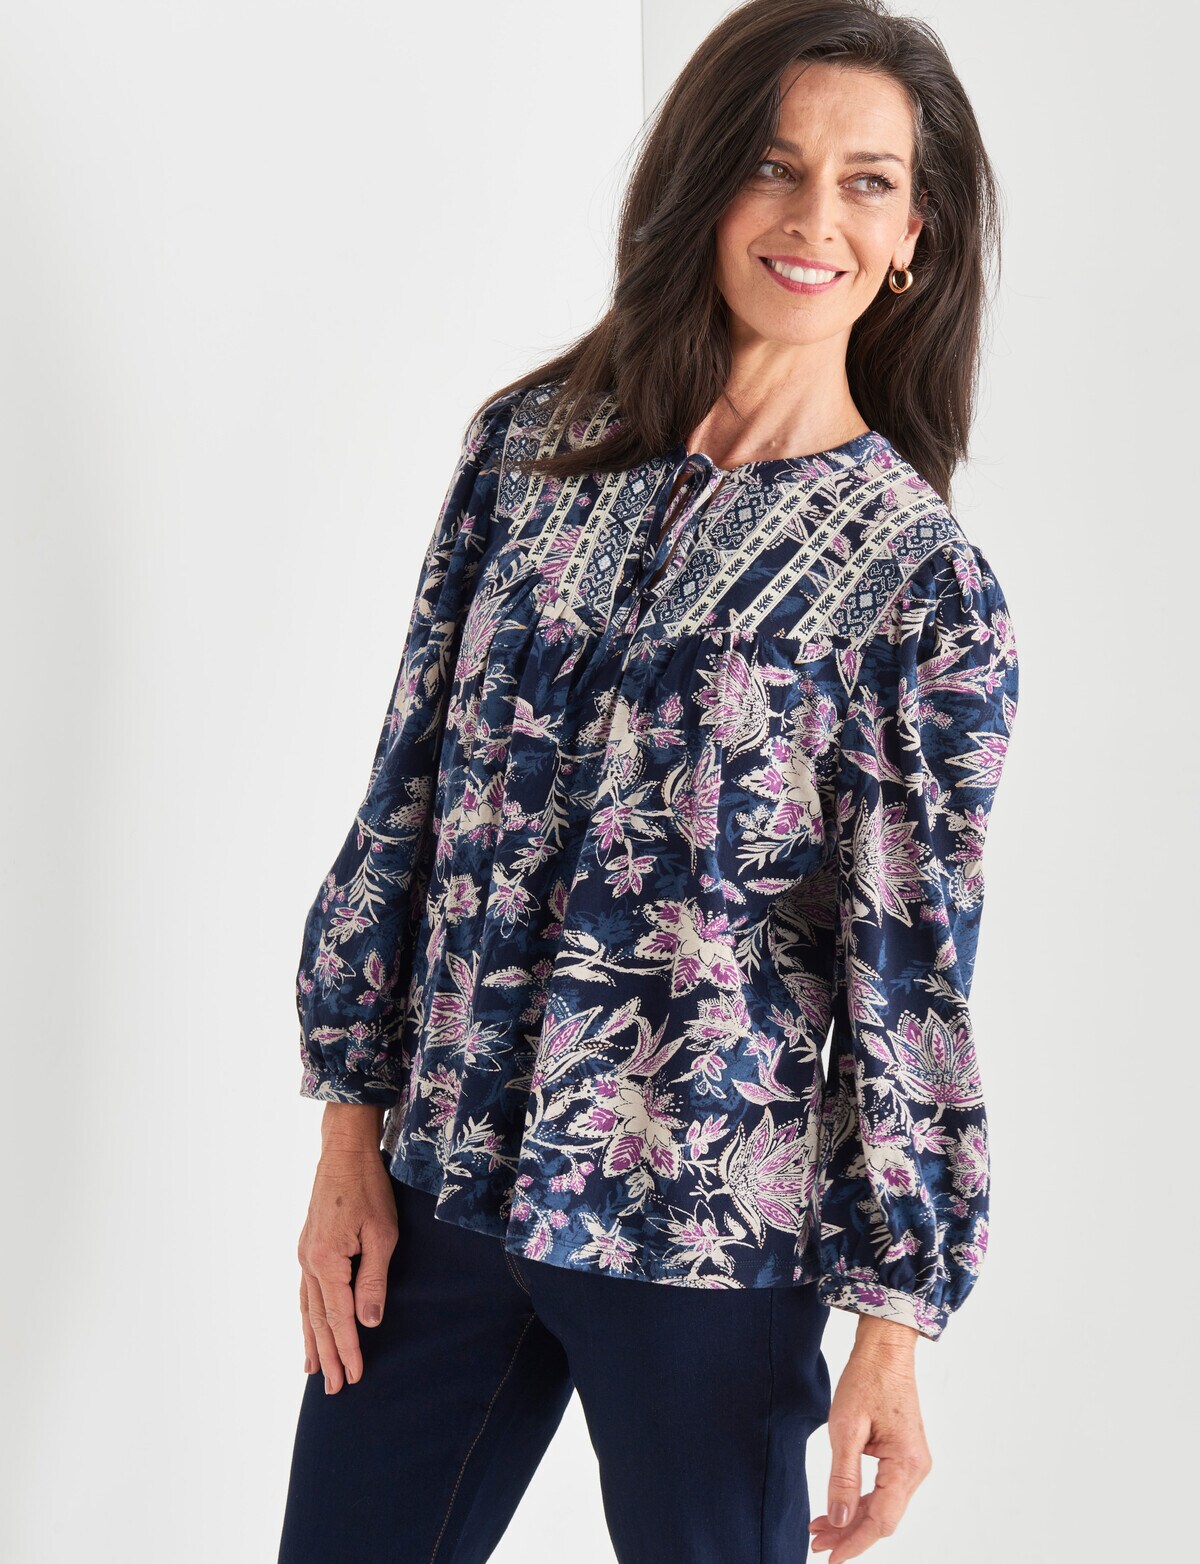 Ella J Floral Embroidery Detail Top, Navy - Tops